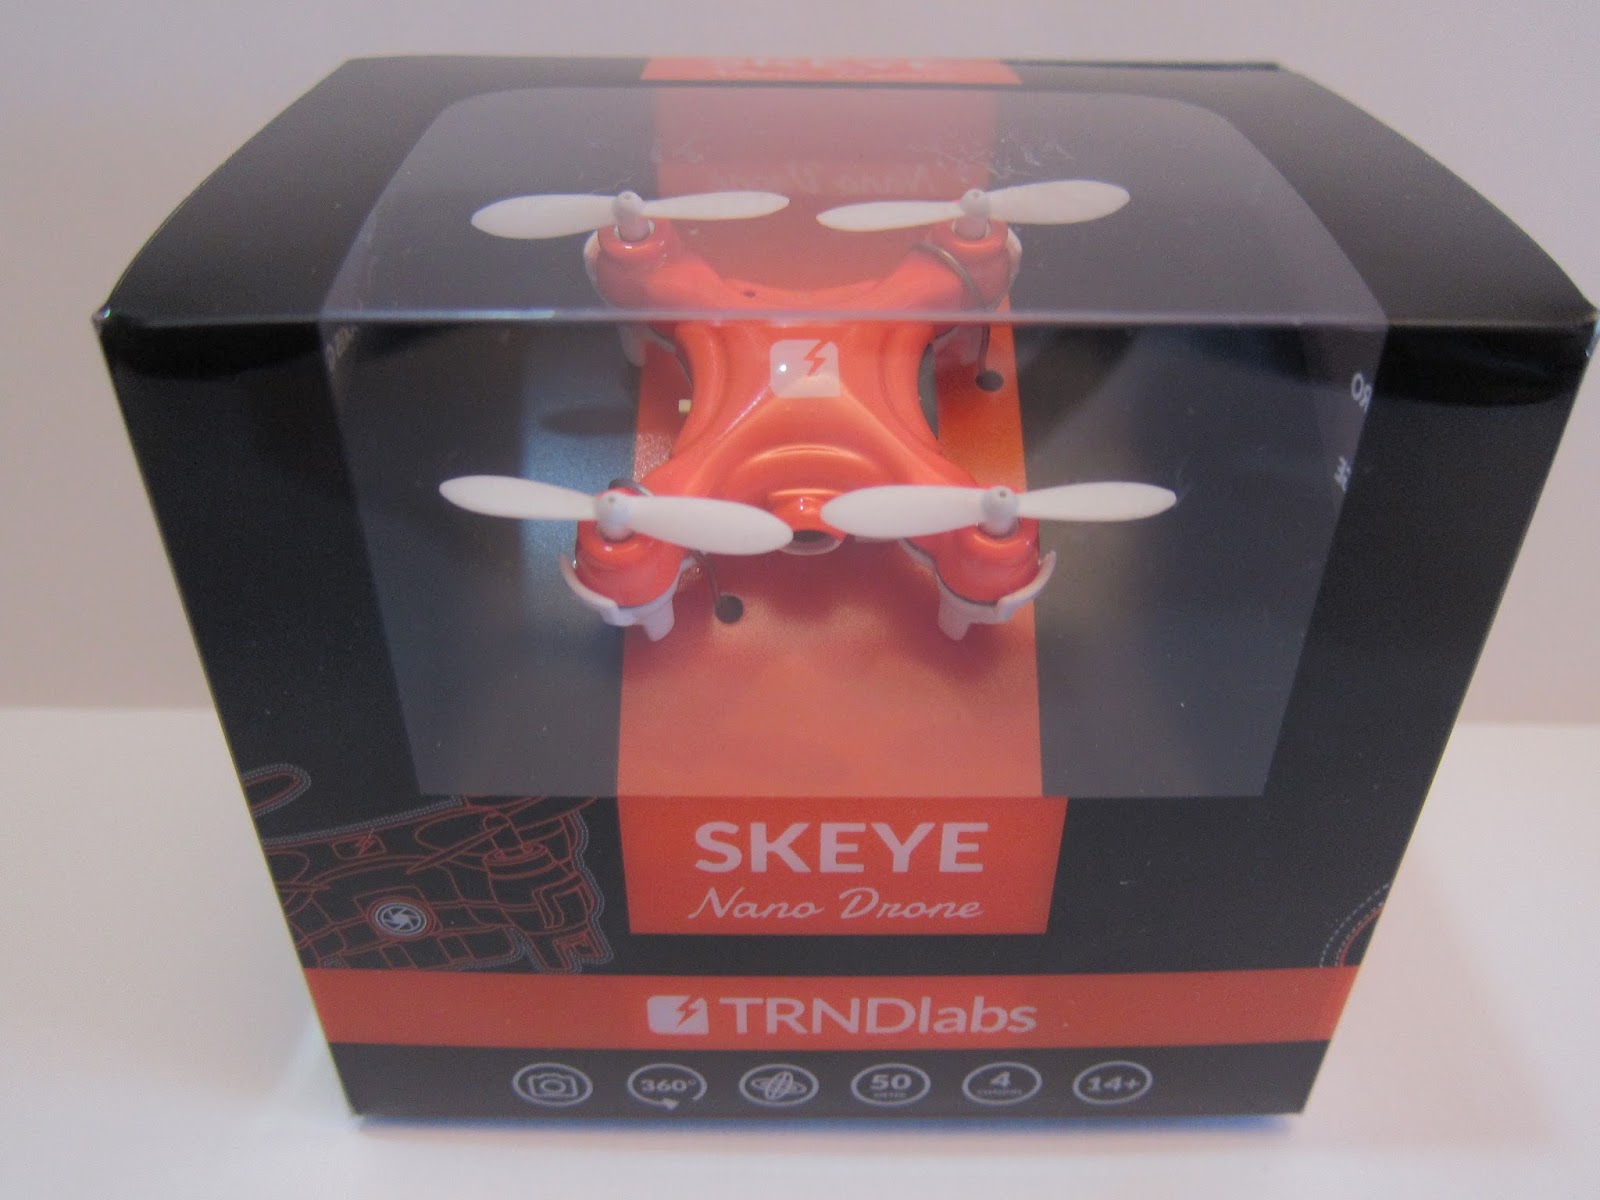 Powered by the rechargeable 3.7v 120 mAh battery, the SKEYE Nano Drone with...